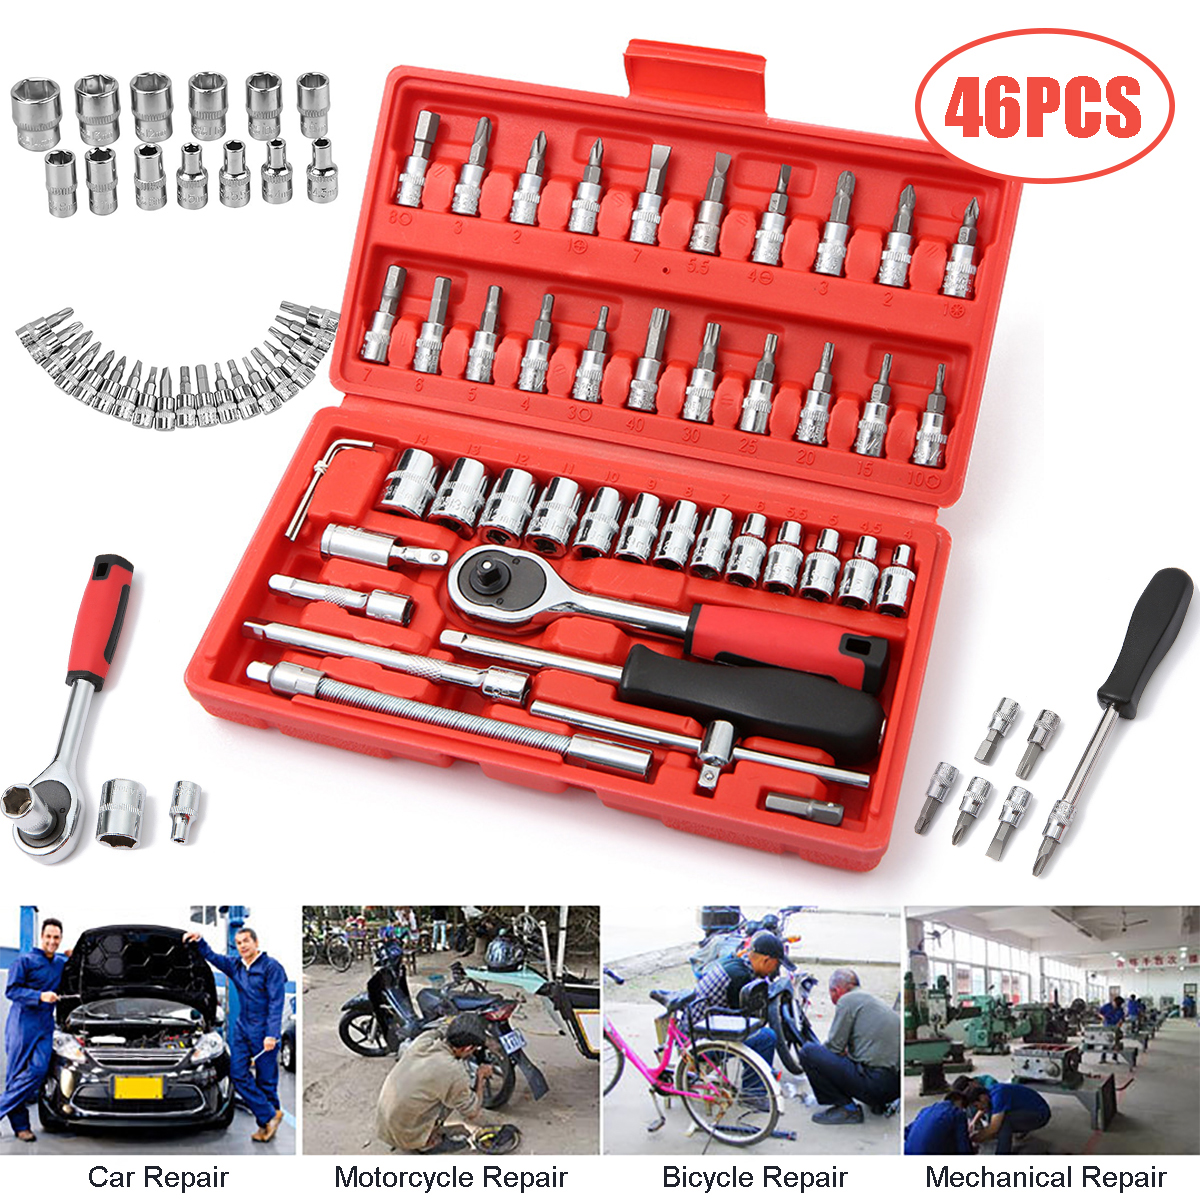 14-Inch-Drive-Socket-Ratchet-Wrench-Socket-Bit-Combination-Tools-Kit-For-Auto-Repairing--Household-1715247-1